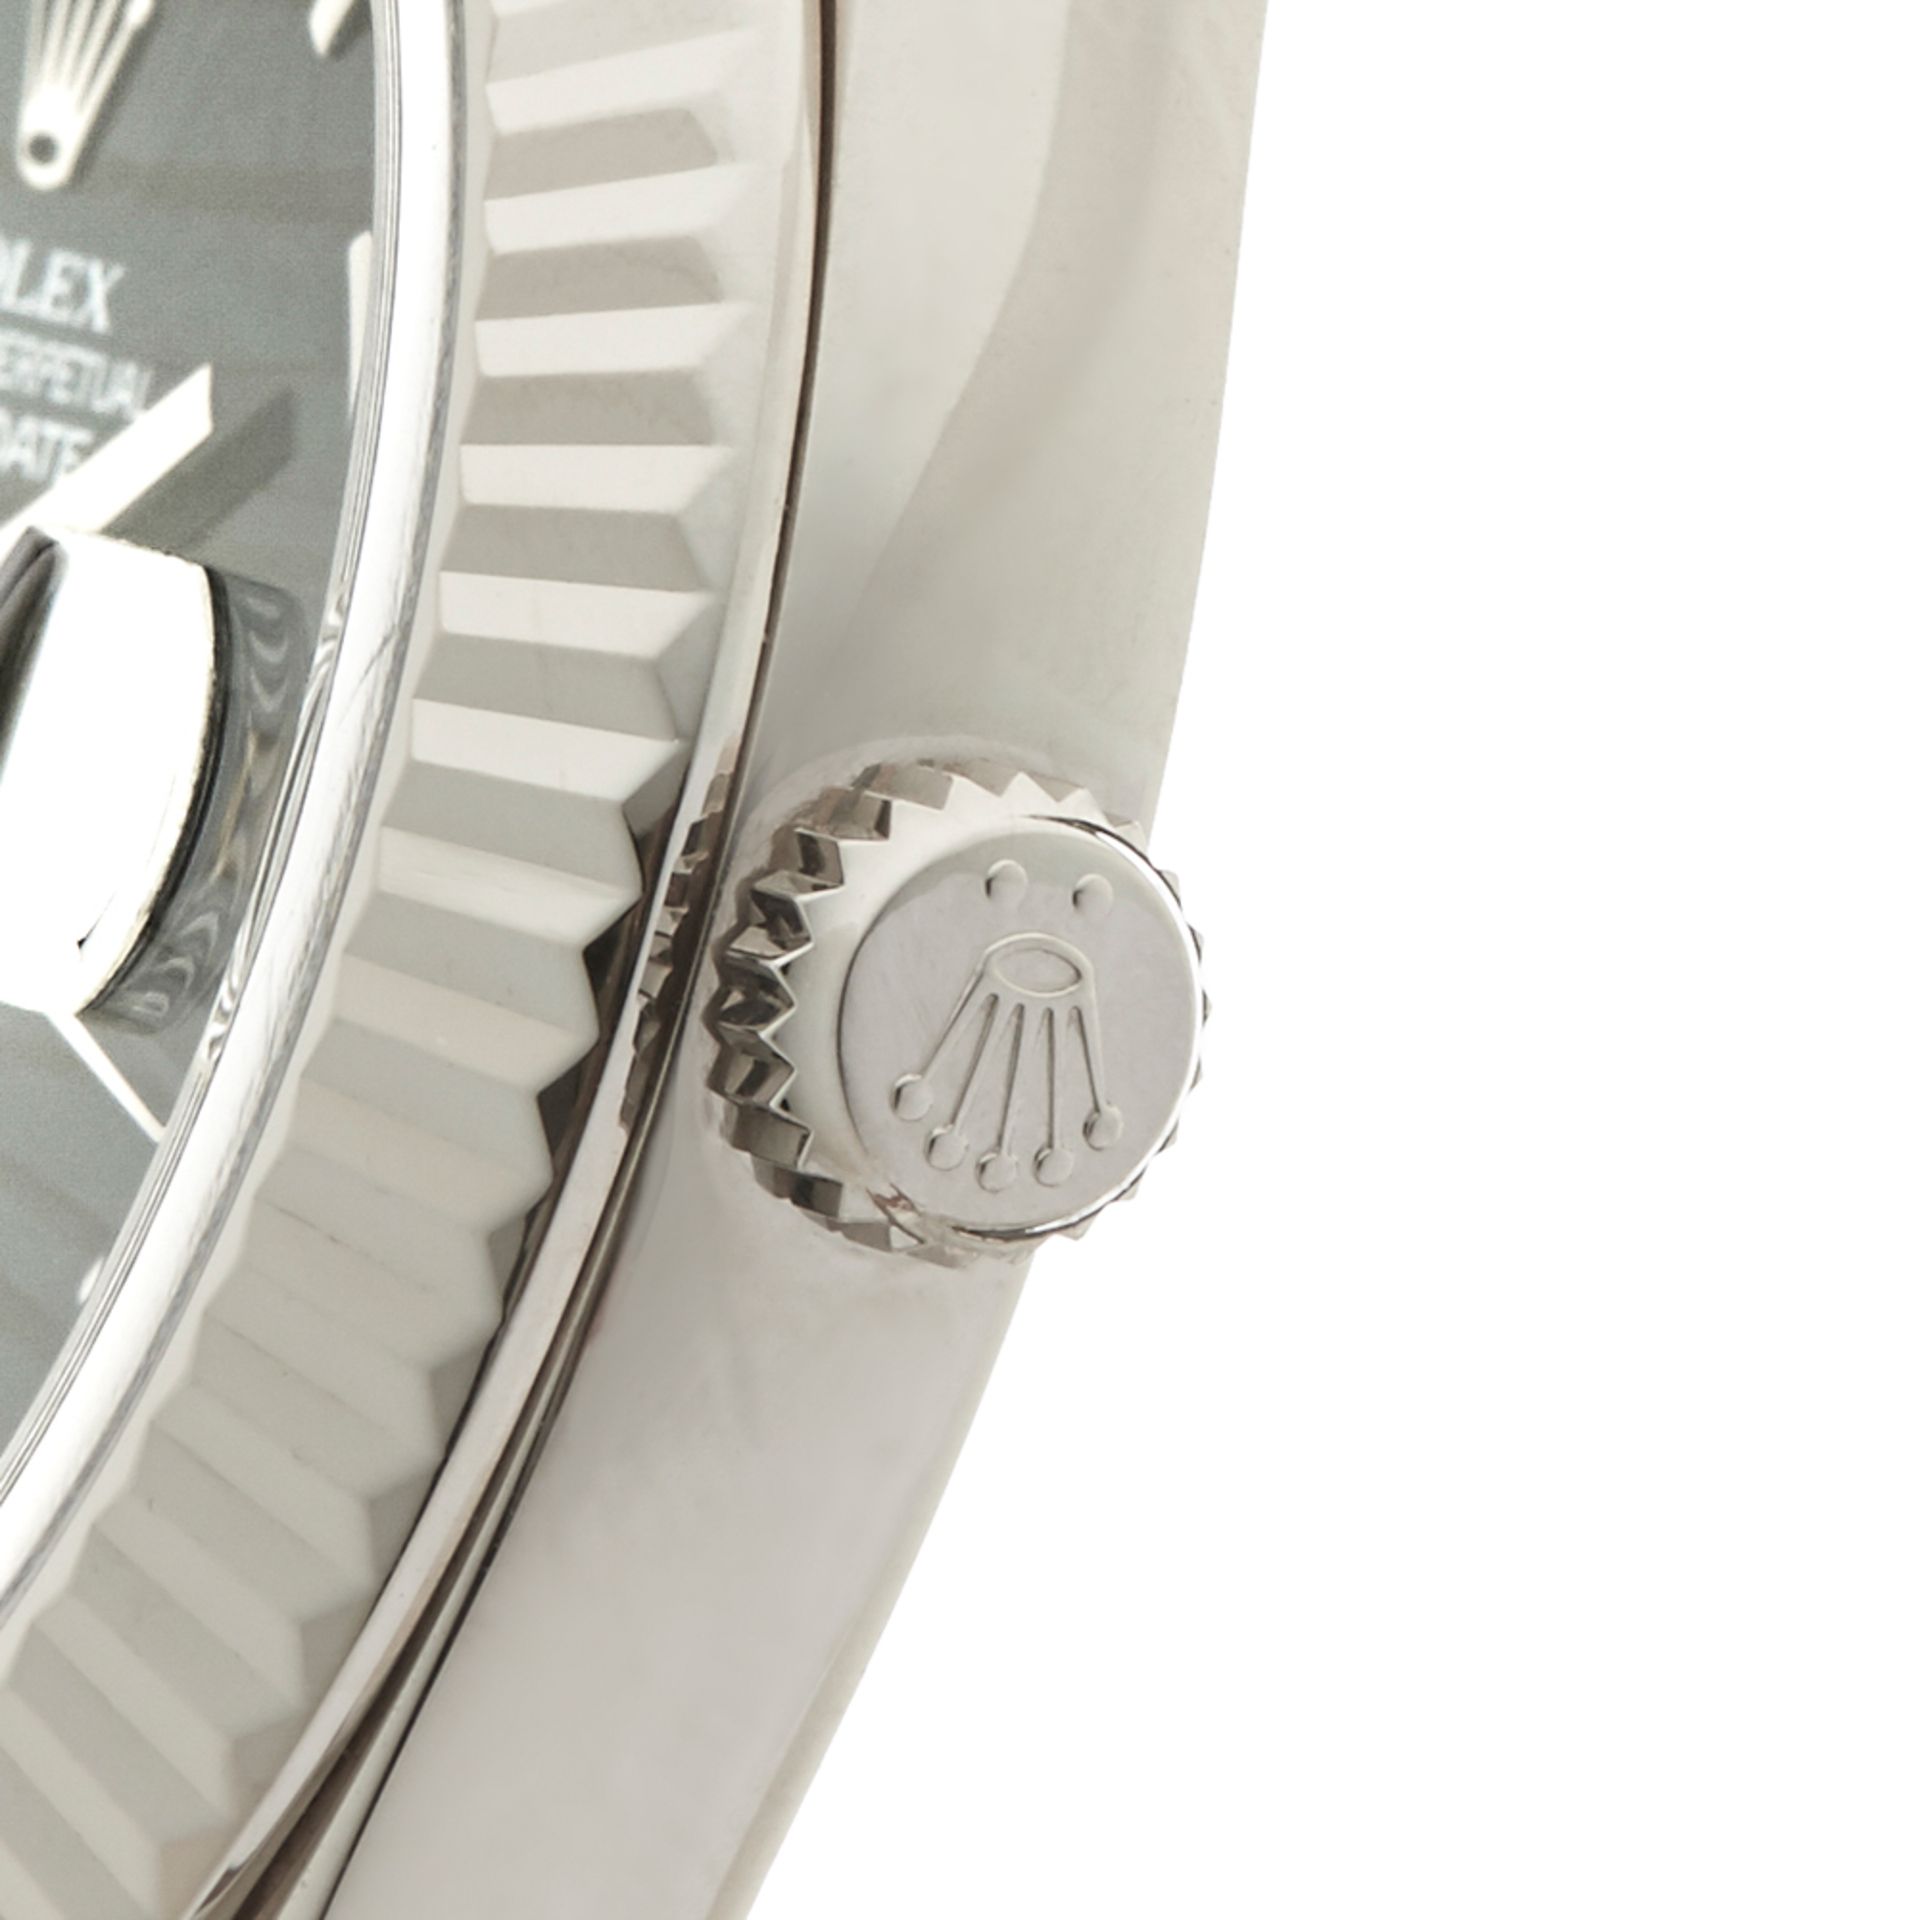 Rolex Day-Date II 41mm 18k White Gold - 218239 - Image 4 of 9